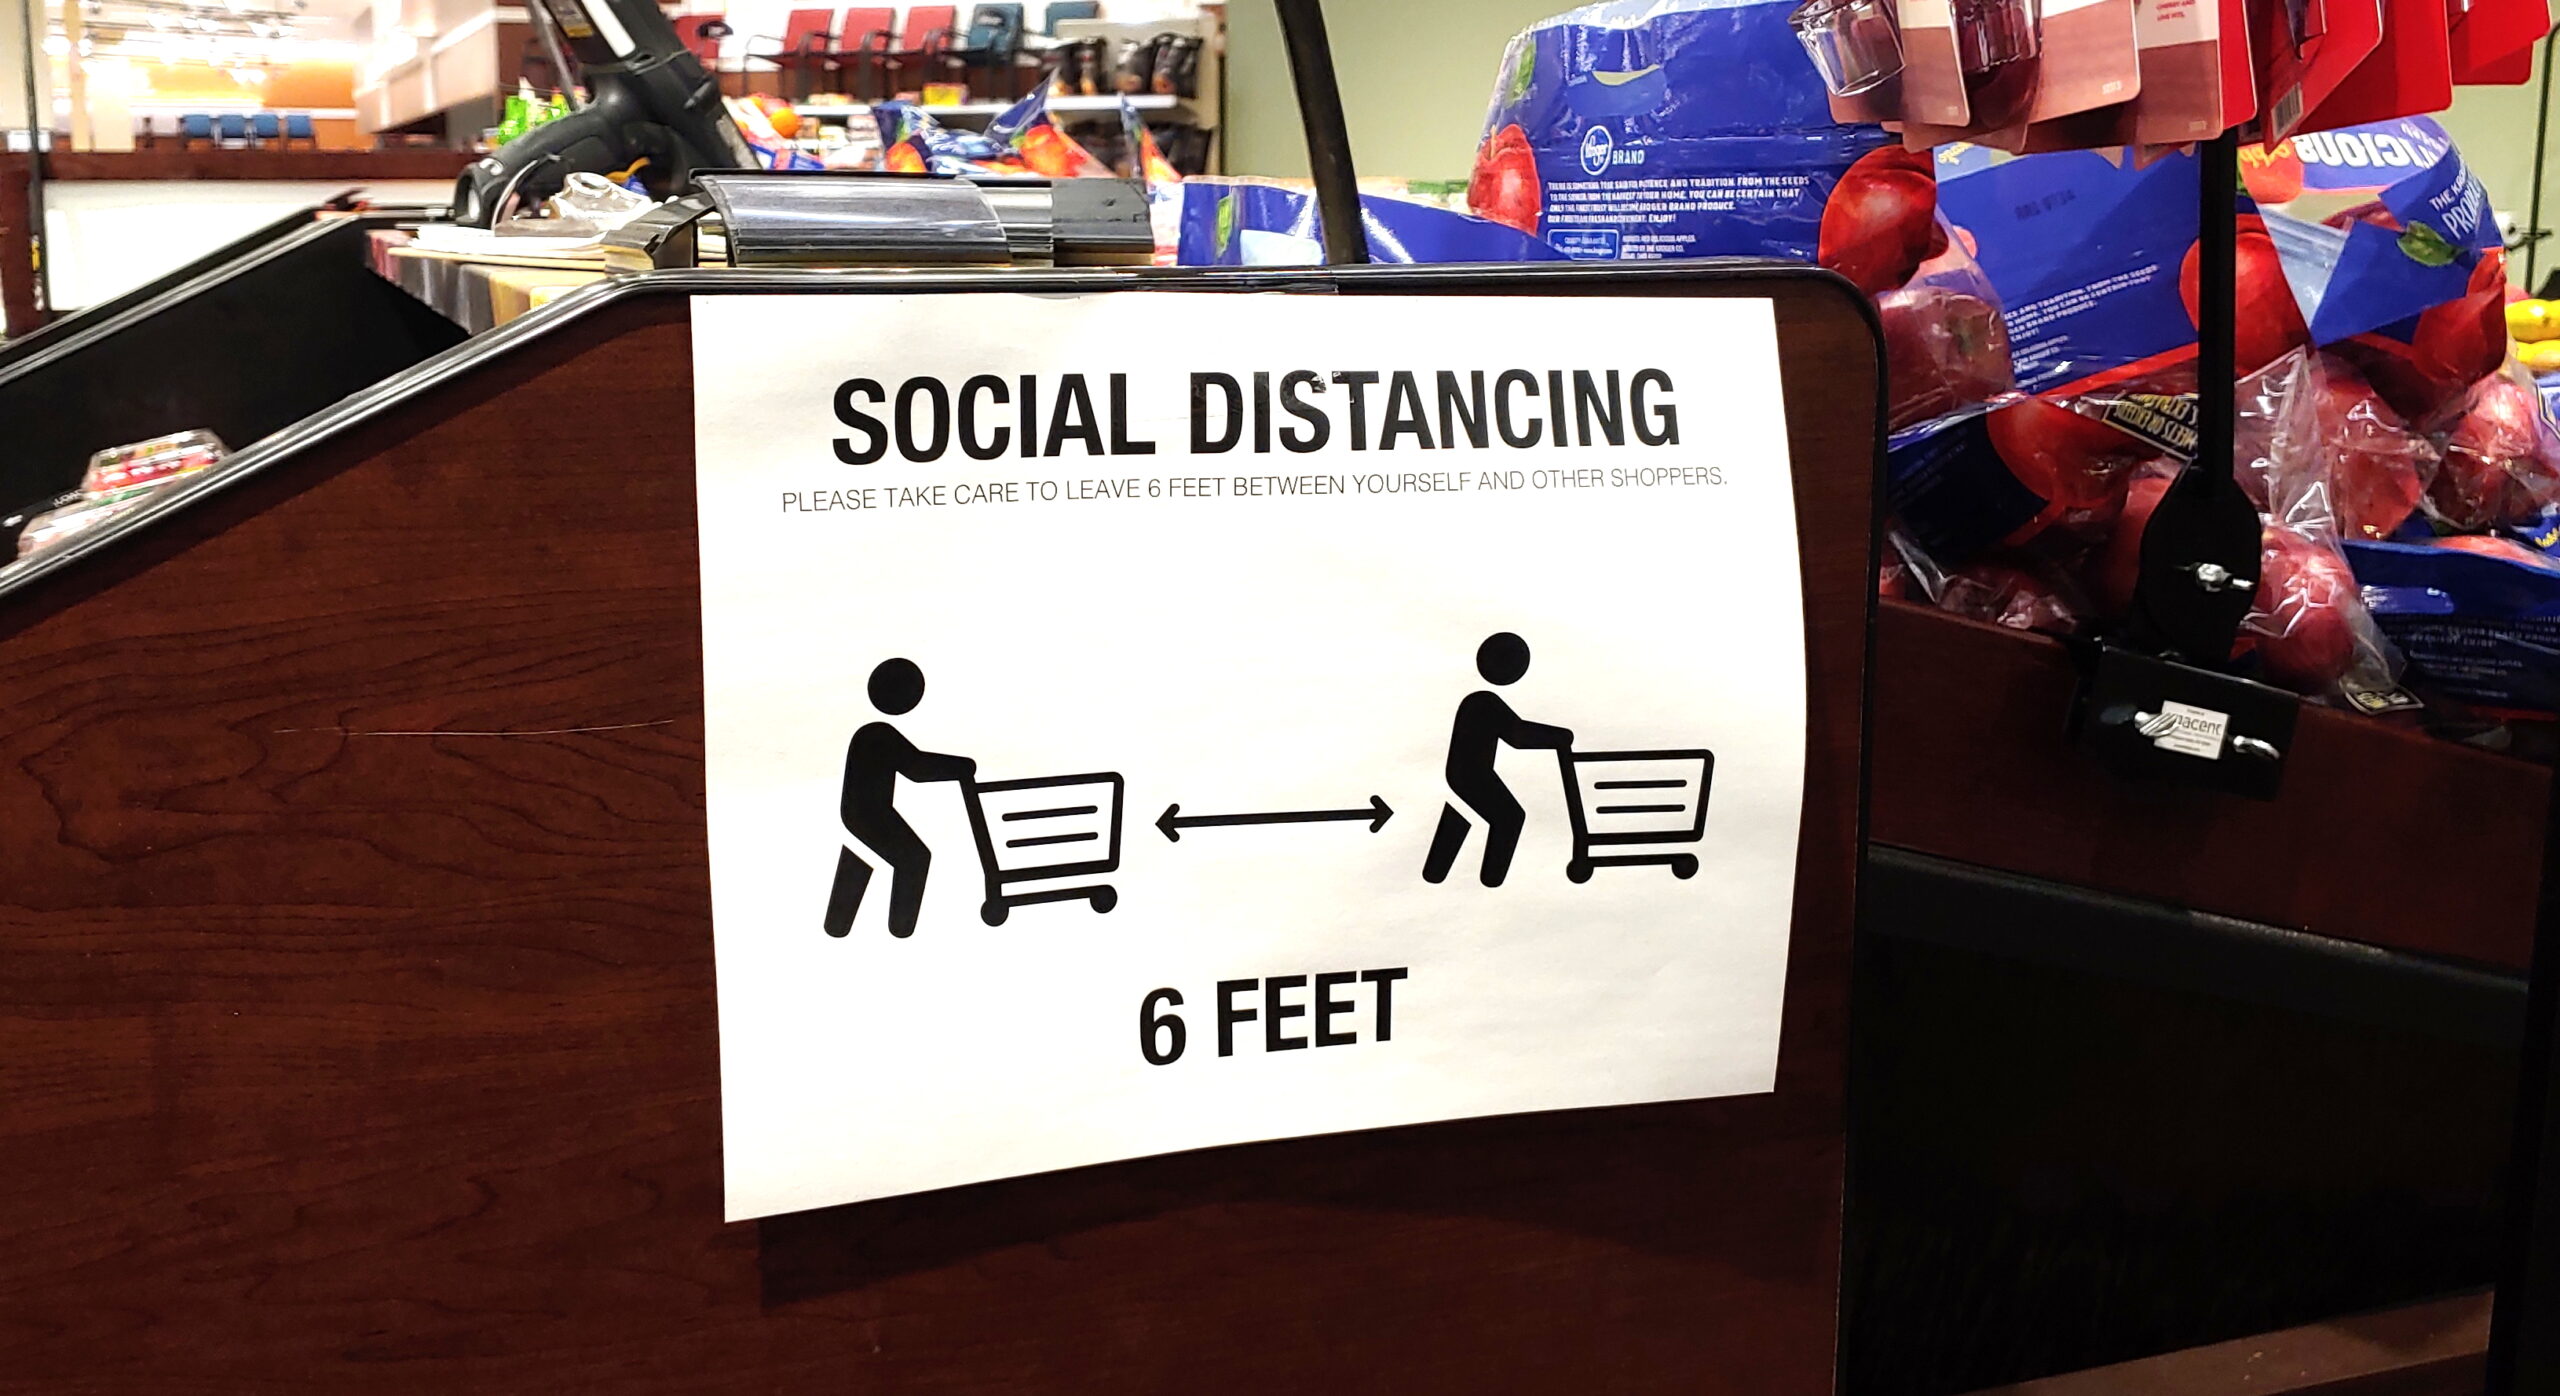 A store sign recommends social distancing